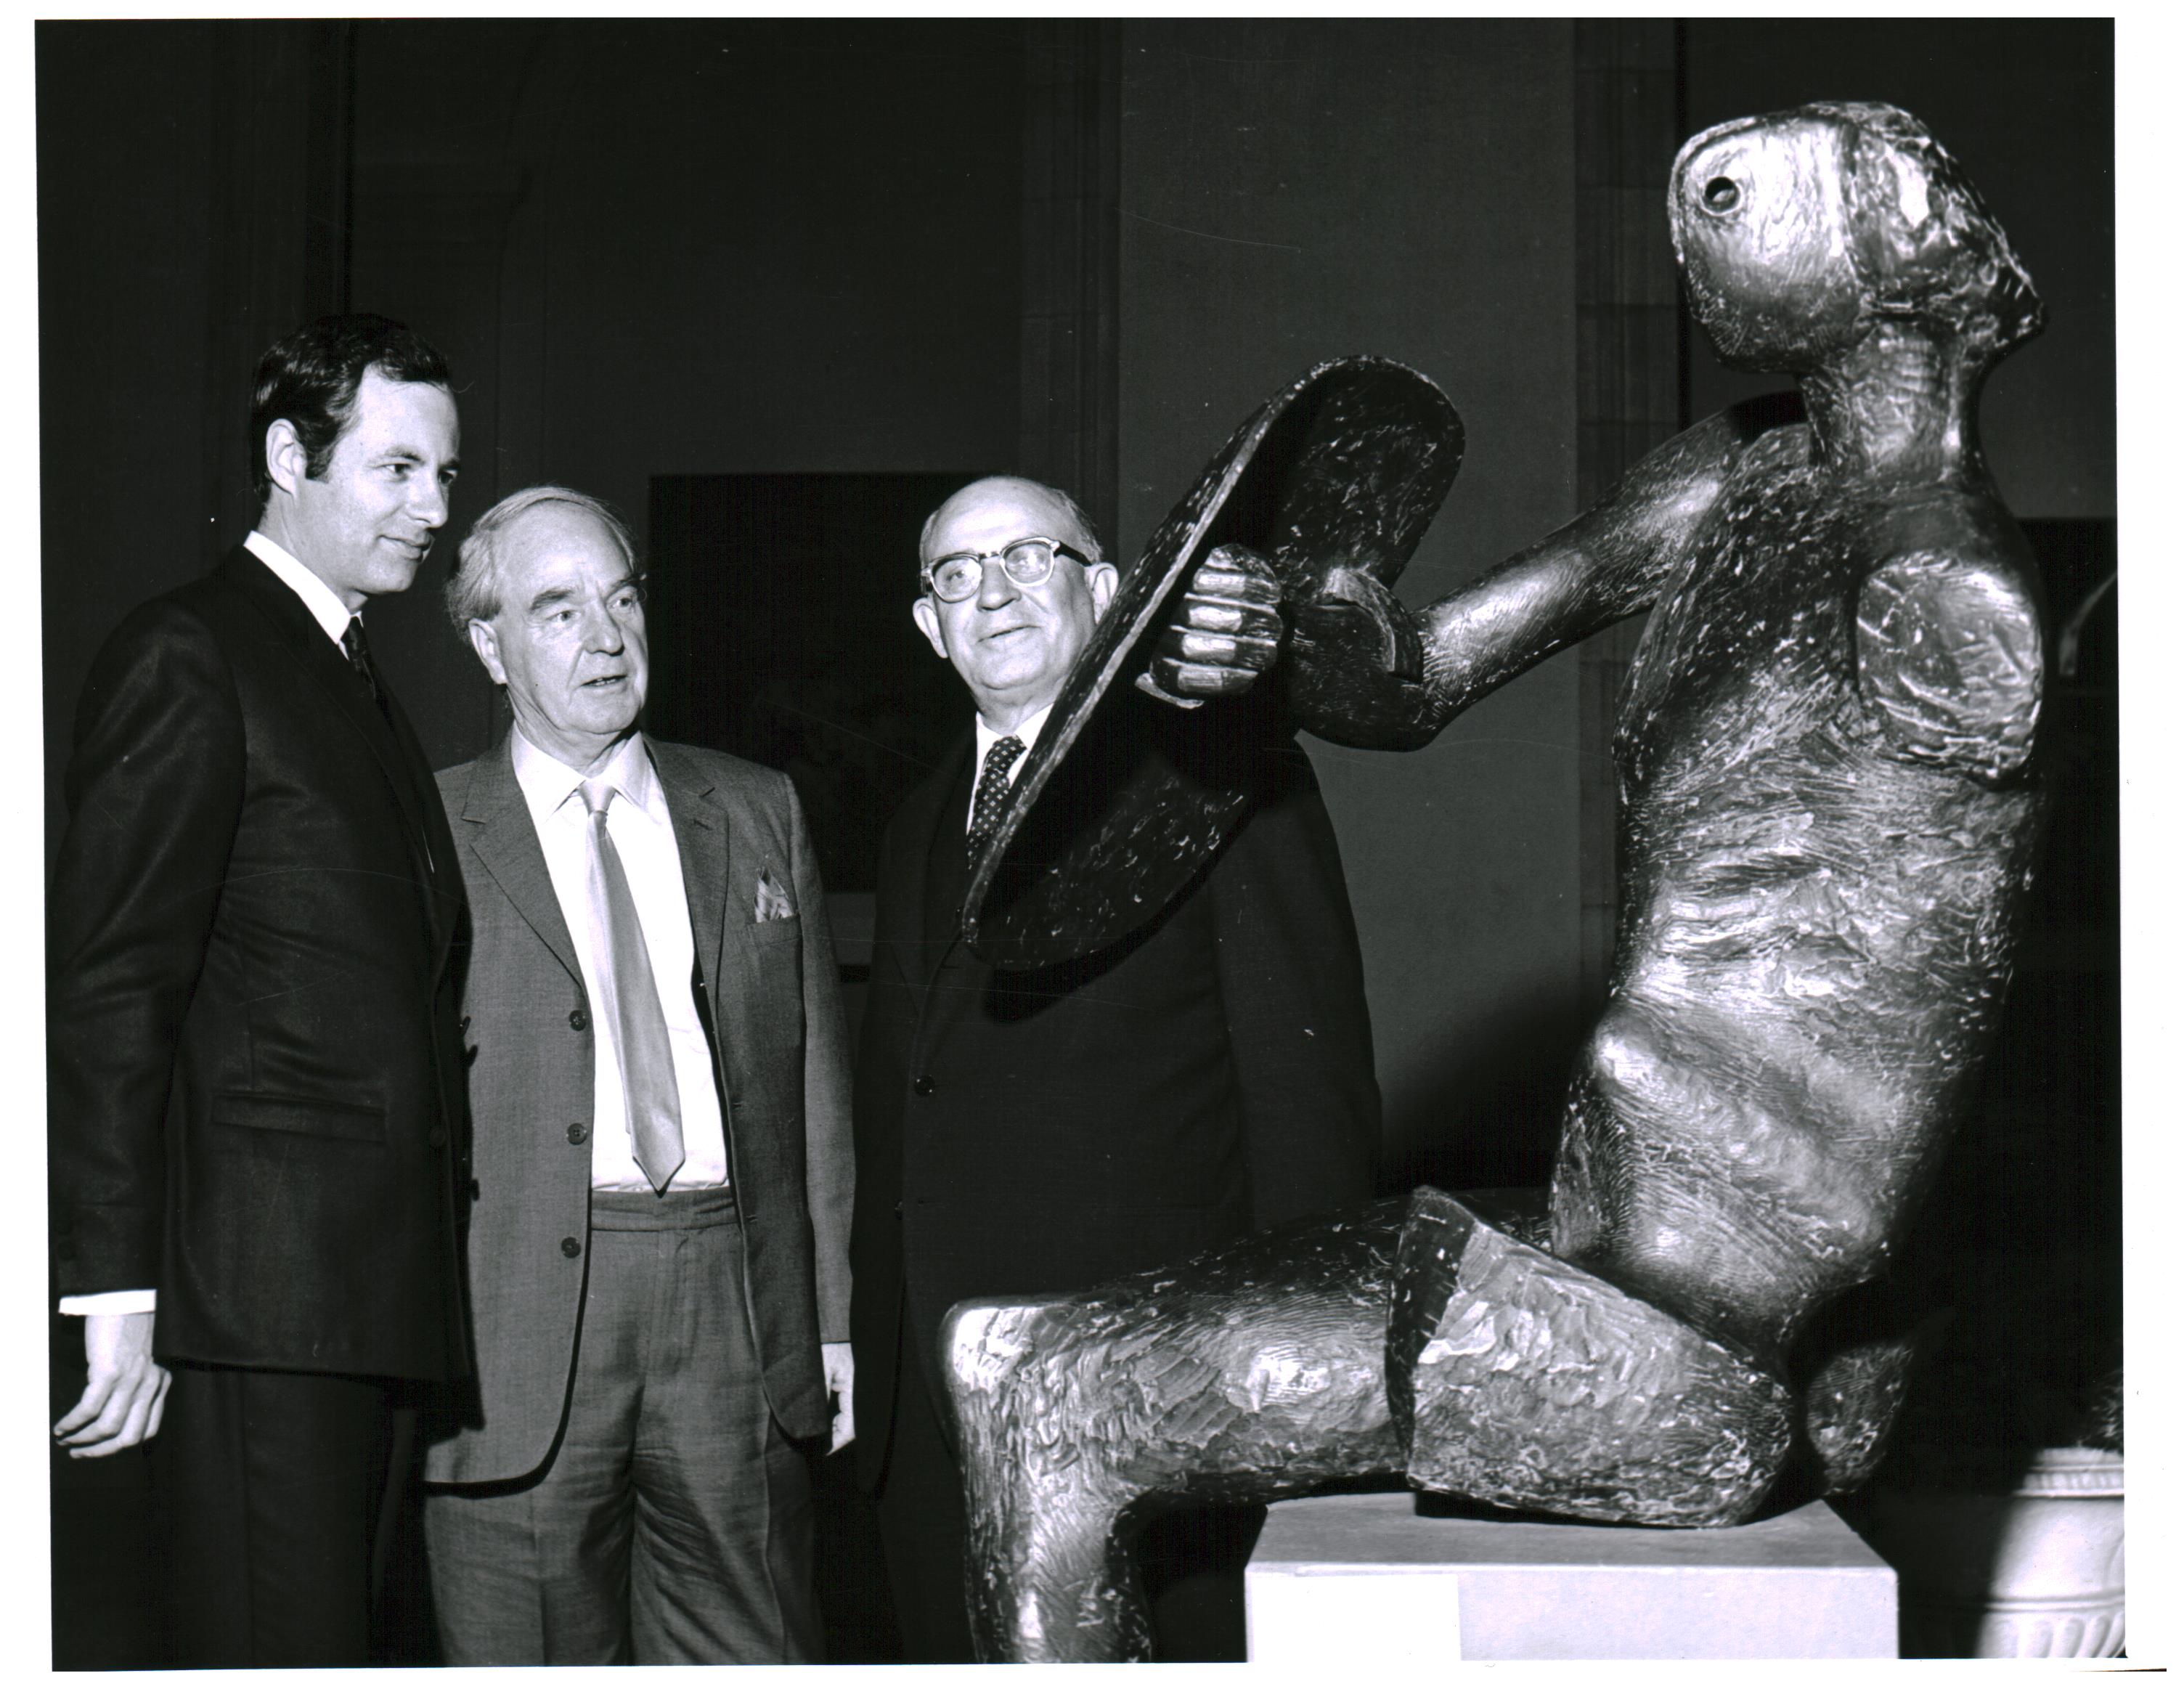 Bill Withrow (left) with sculptor Henry Moore (middle) and Mr. S.J. Zacks (right) with work Warrior with Shield